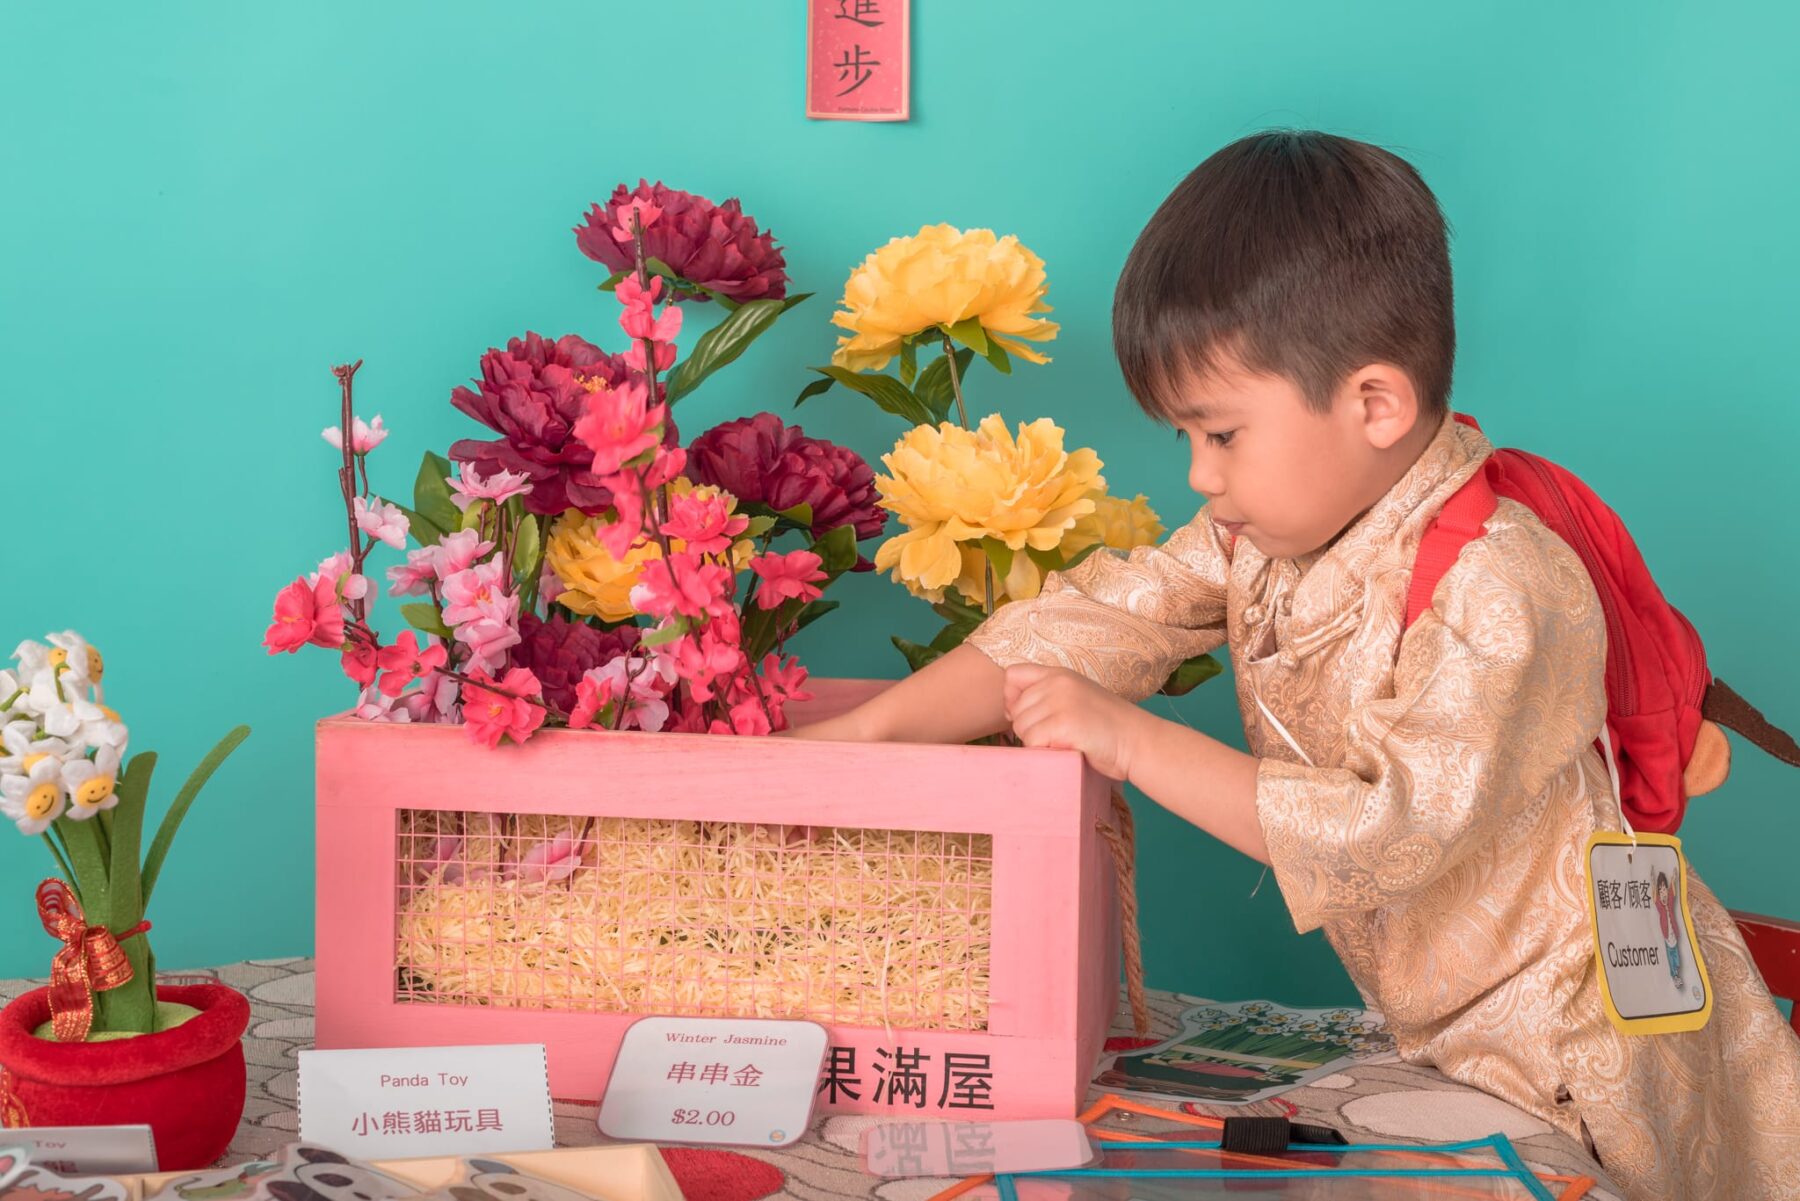 Chinese New Year activities for kids